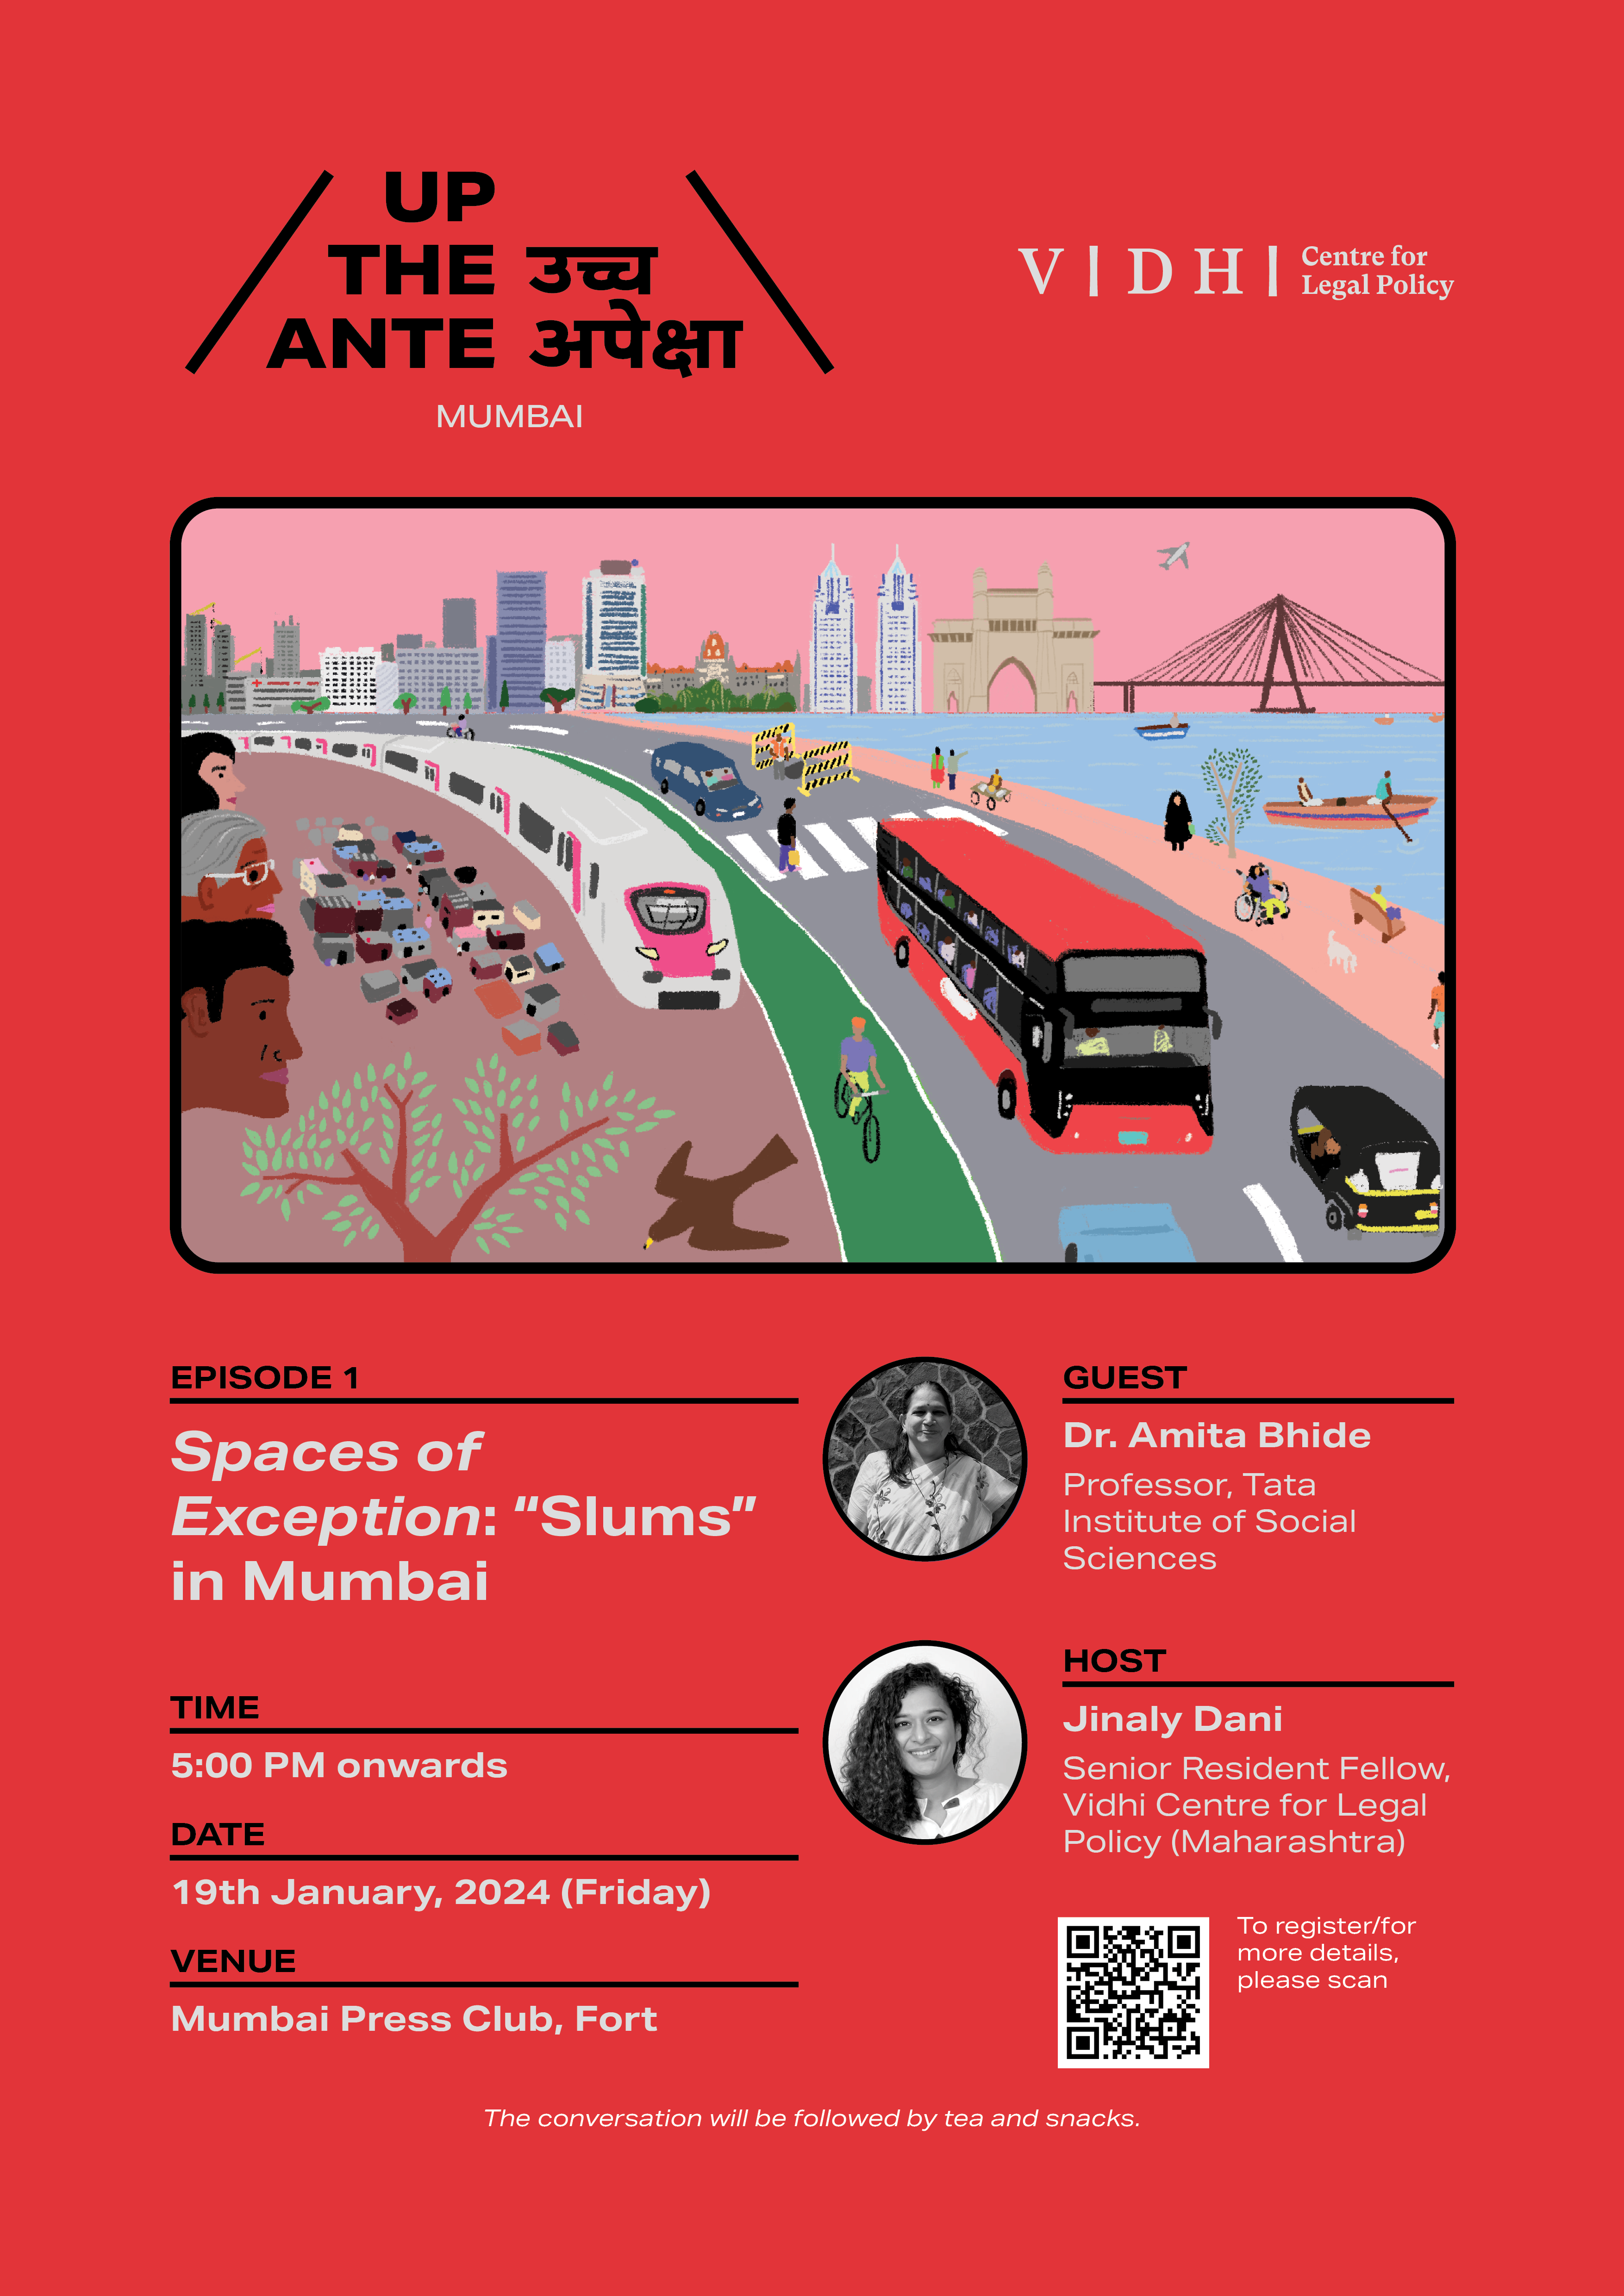 UP THE ANTE JANUARY 19 2024 FROM 5:00 PM AT MUMBAI PRESS CLUB. The discussion between Dr Amita Bhide & Jinaly Dani will be on Spaces of Exception: Slums in Mumbai